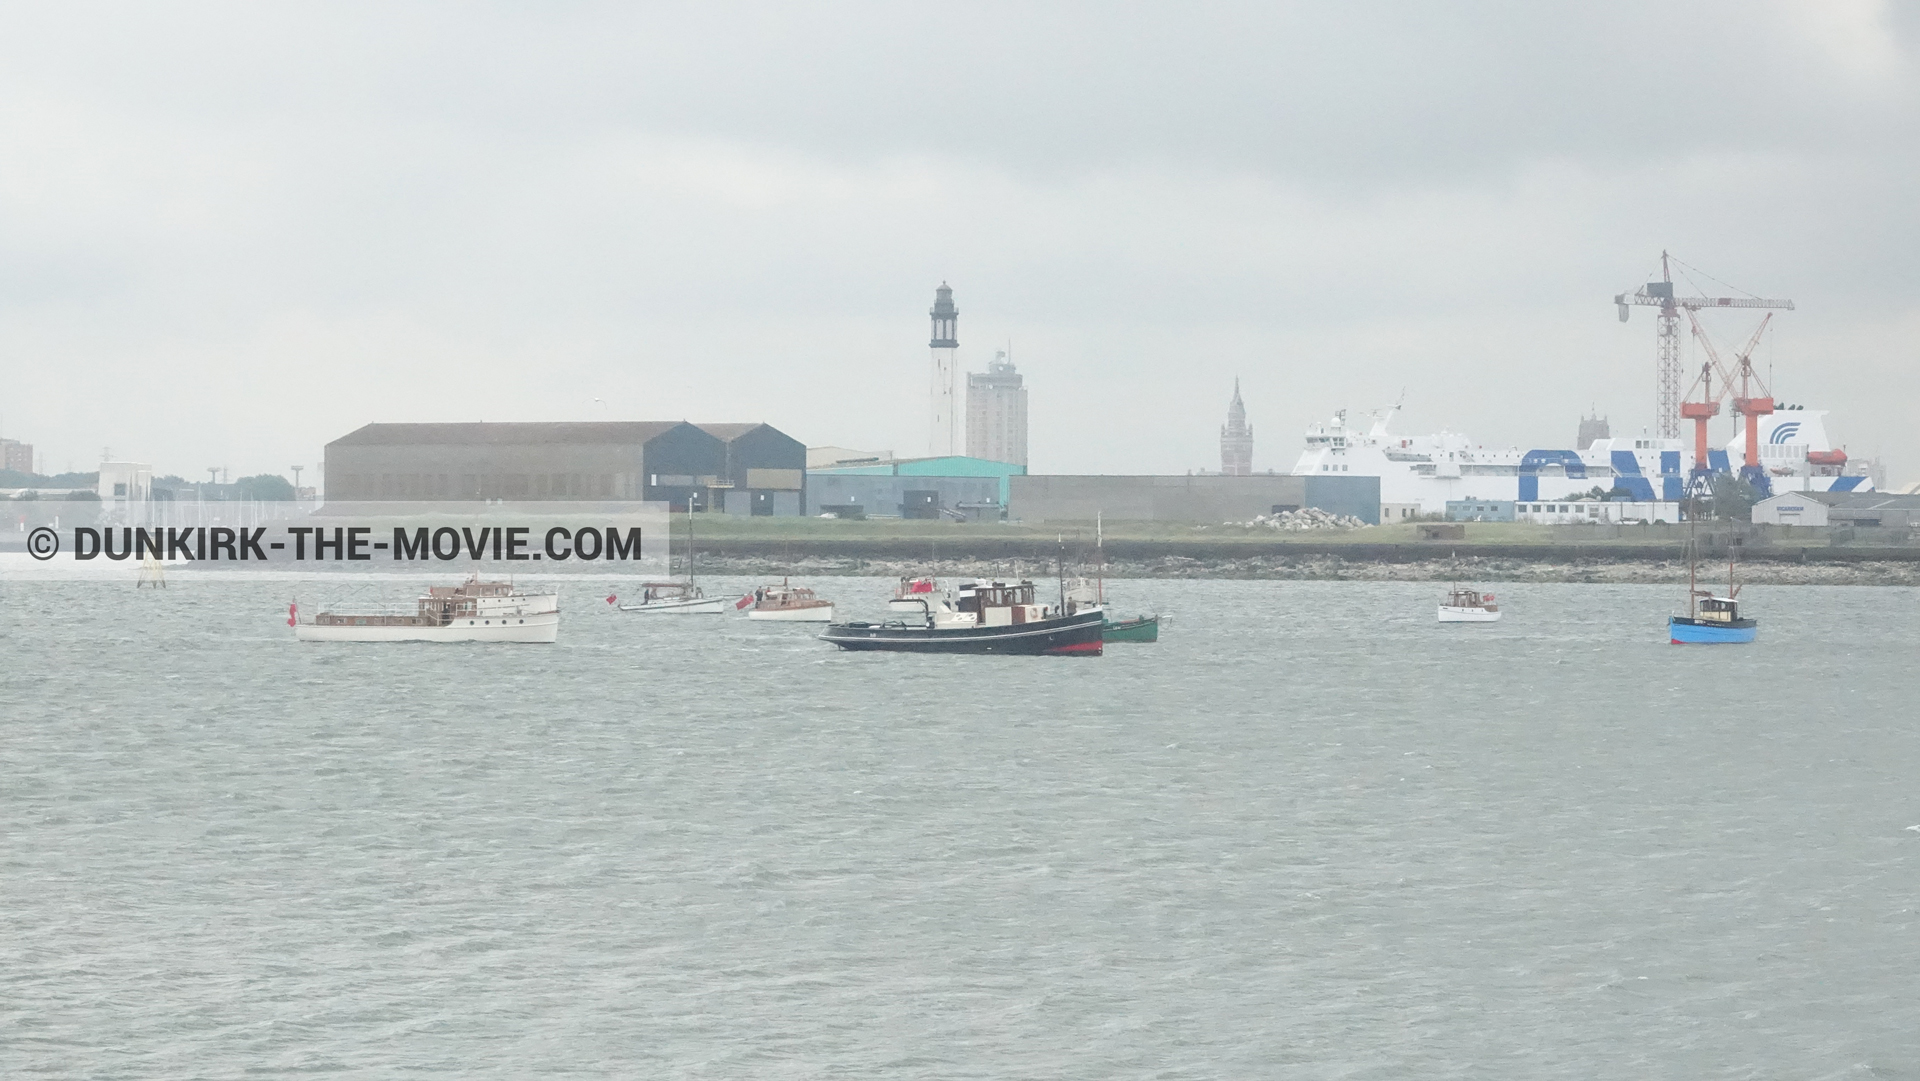 Picture with boat, Dunkirk lighthouse,  from behind the scene of the Dunkirk movie by Nolan